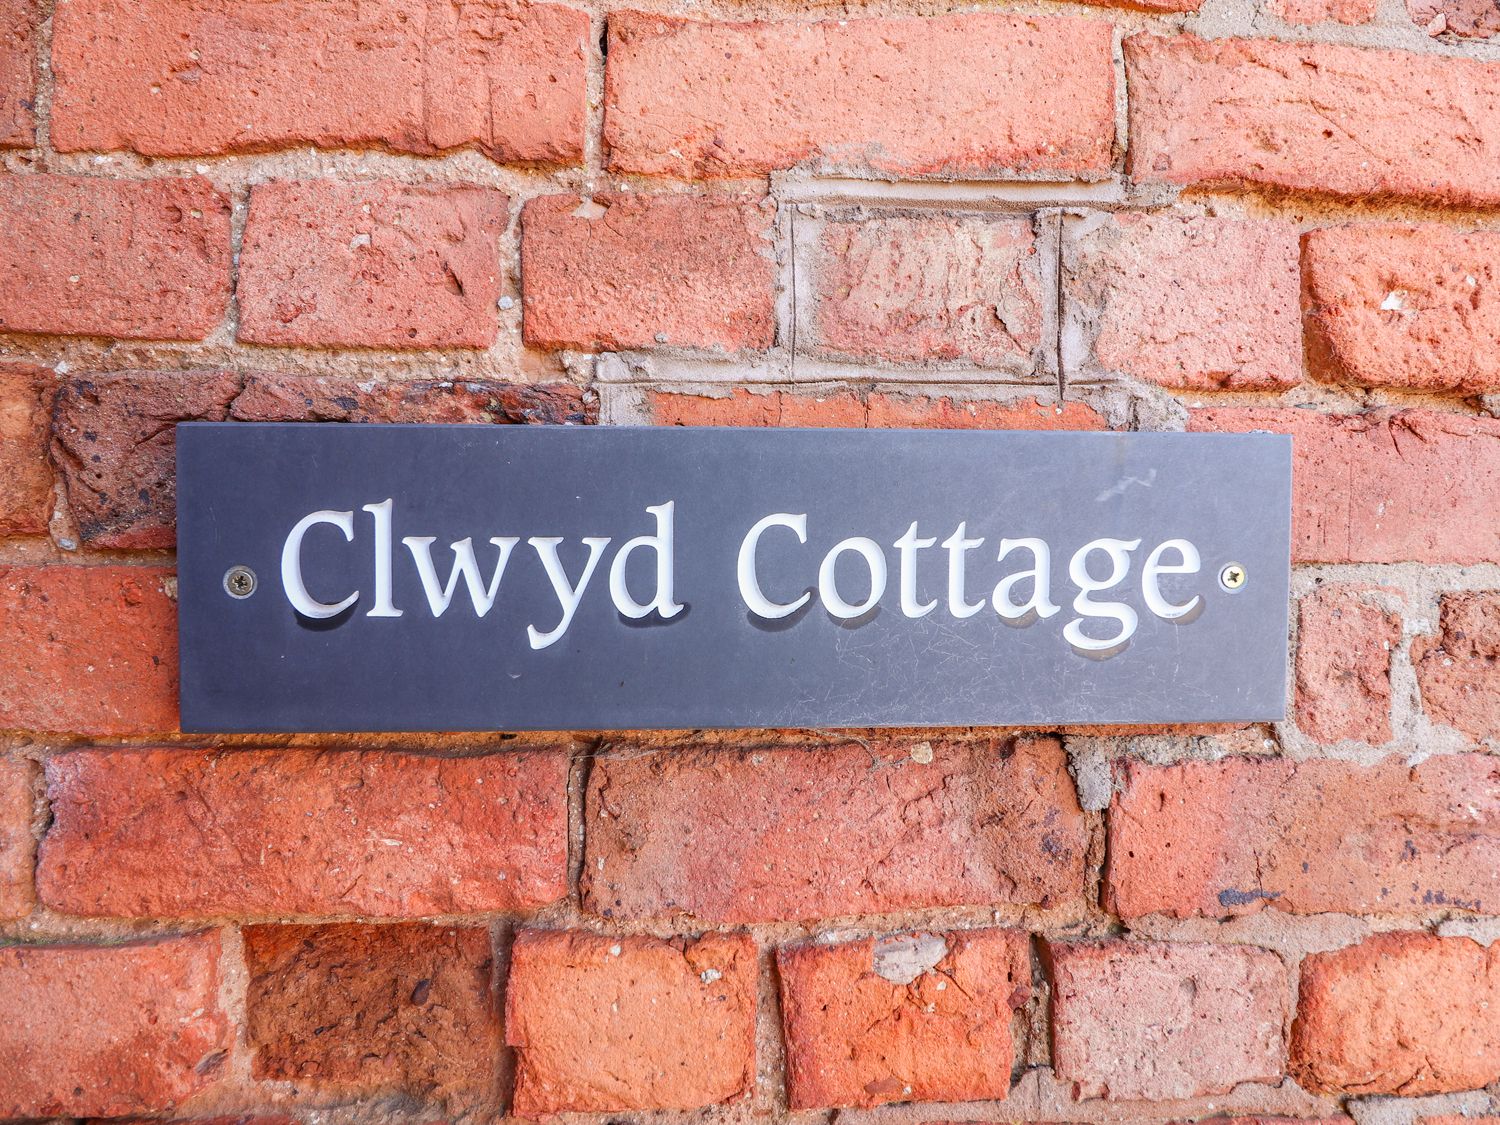 Clywd Cottage, Wales